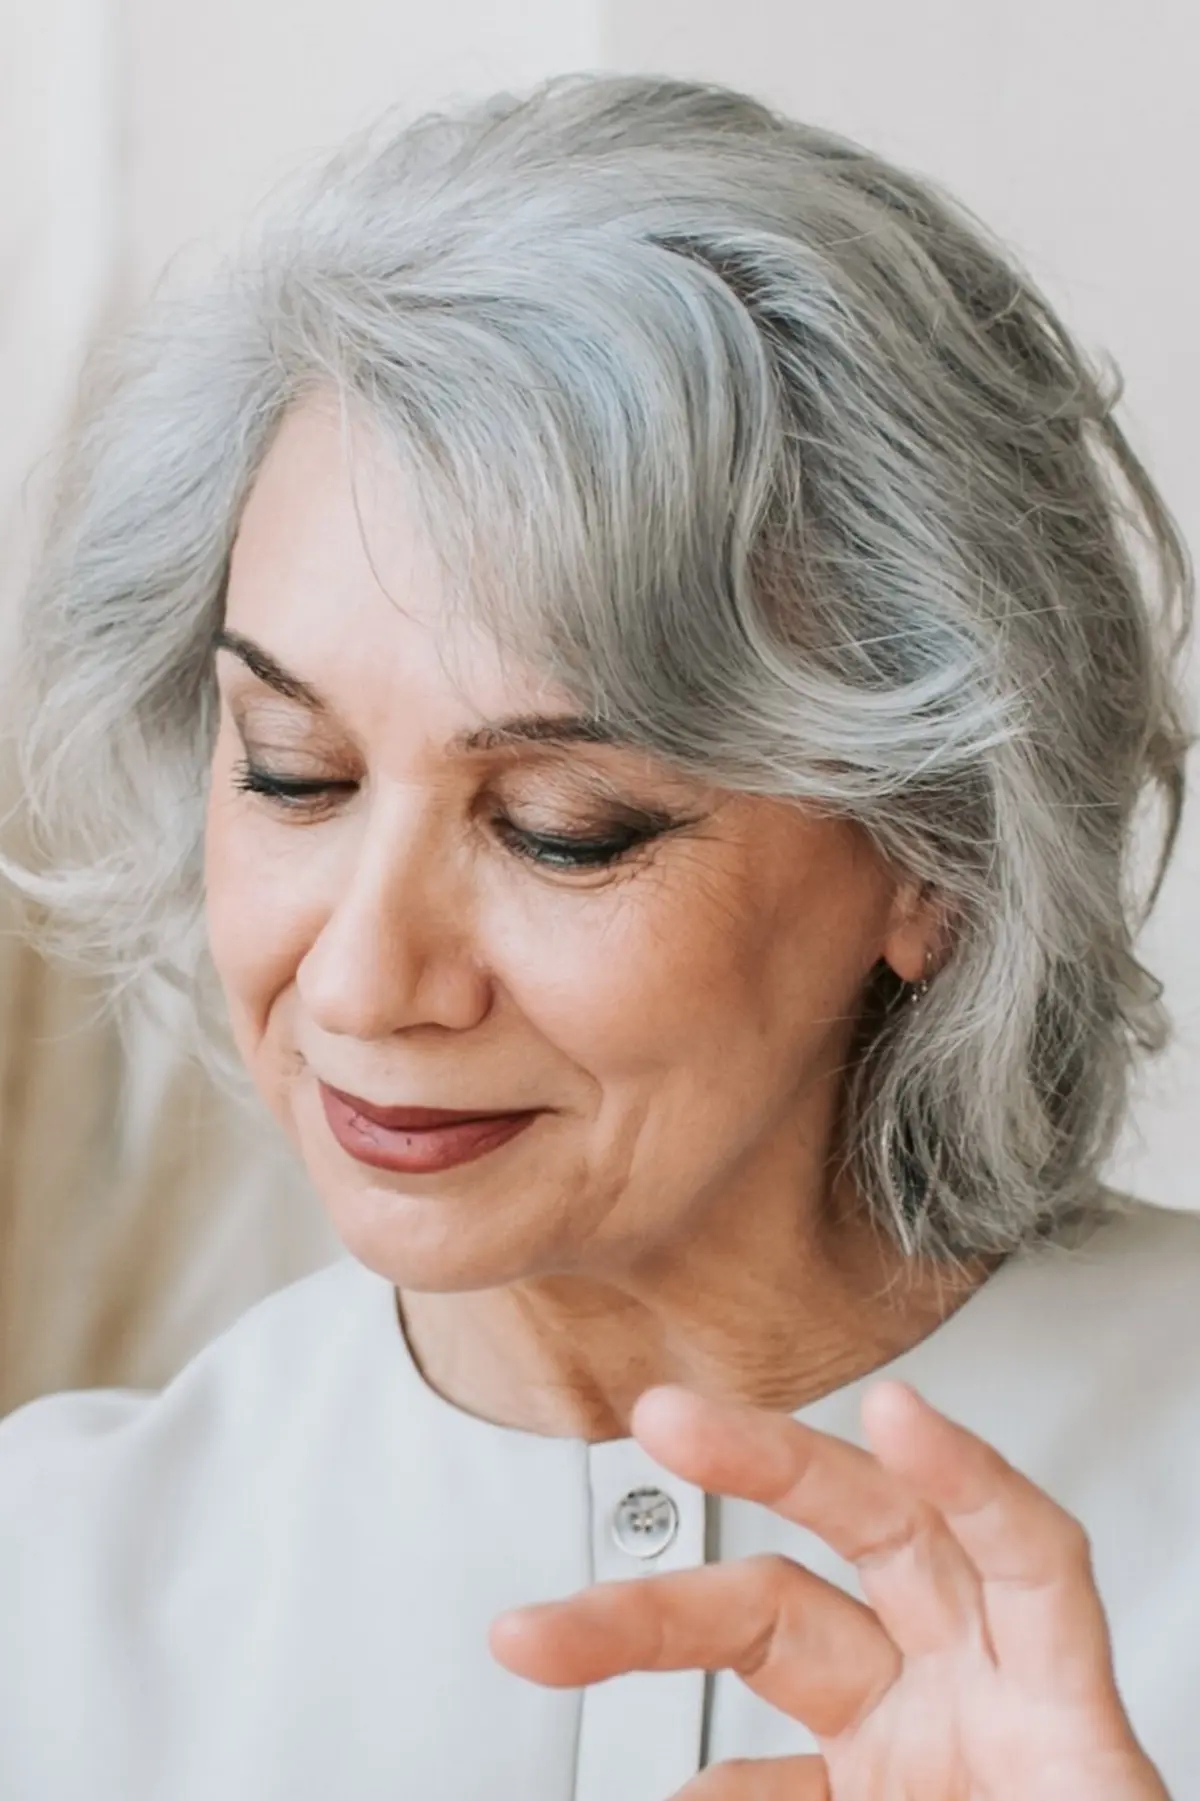 What colour eyeshadow for over 50